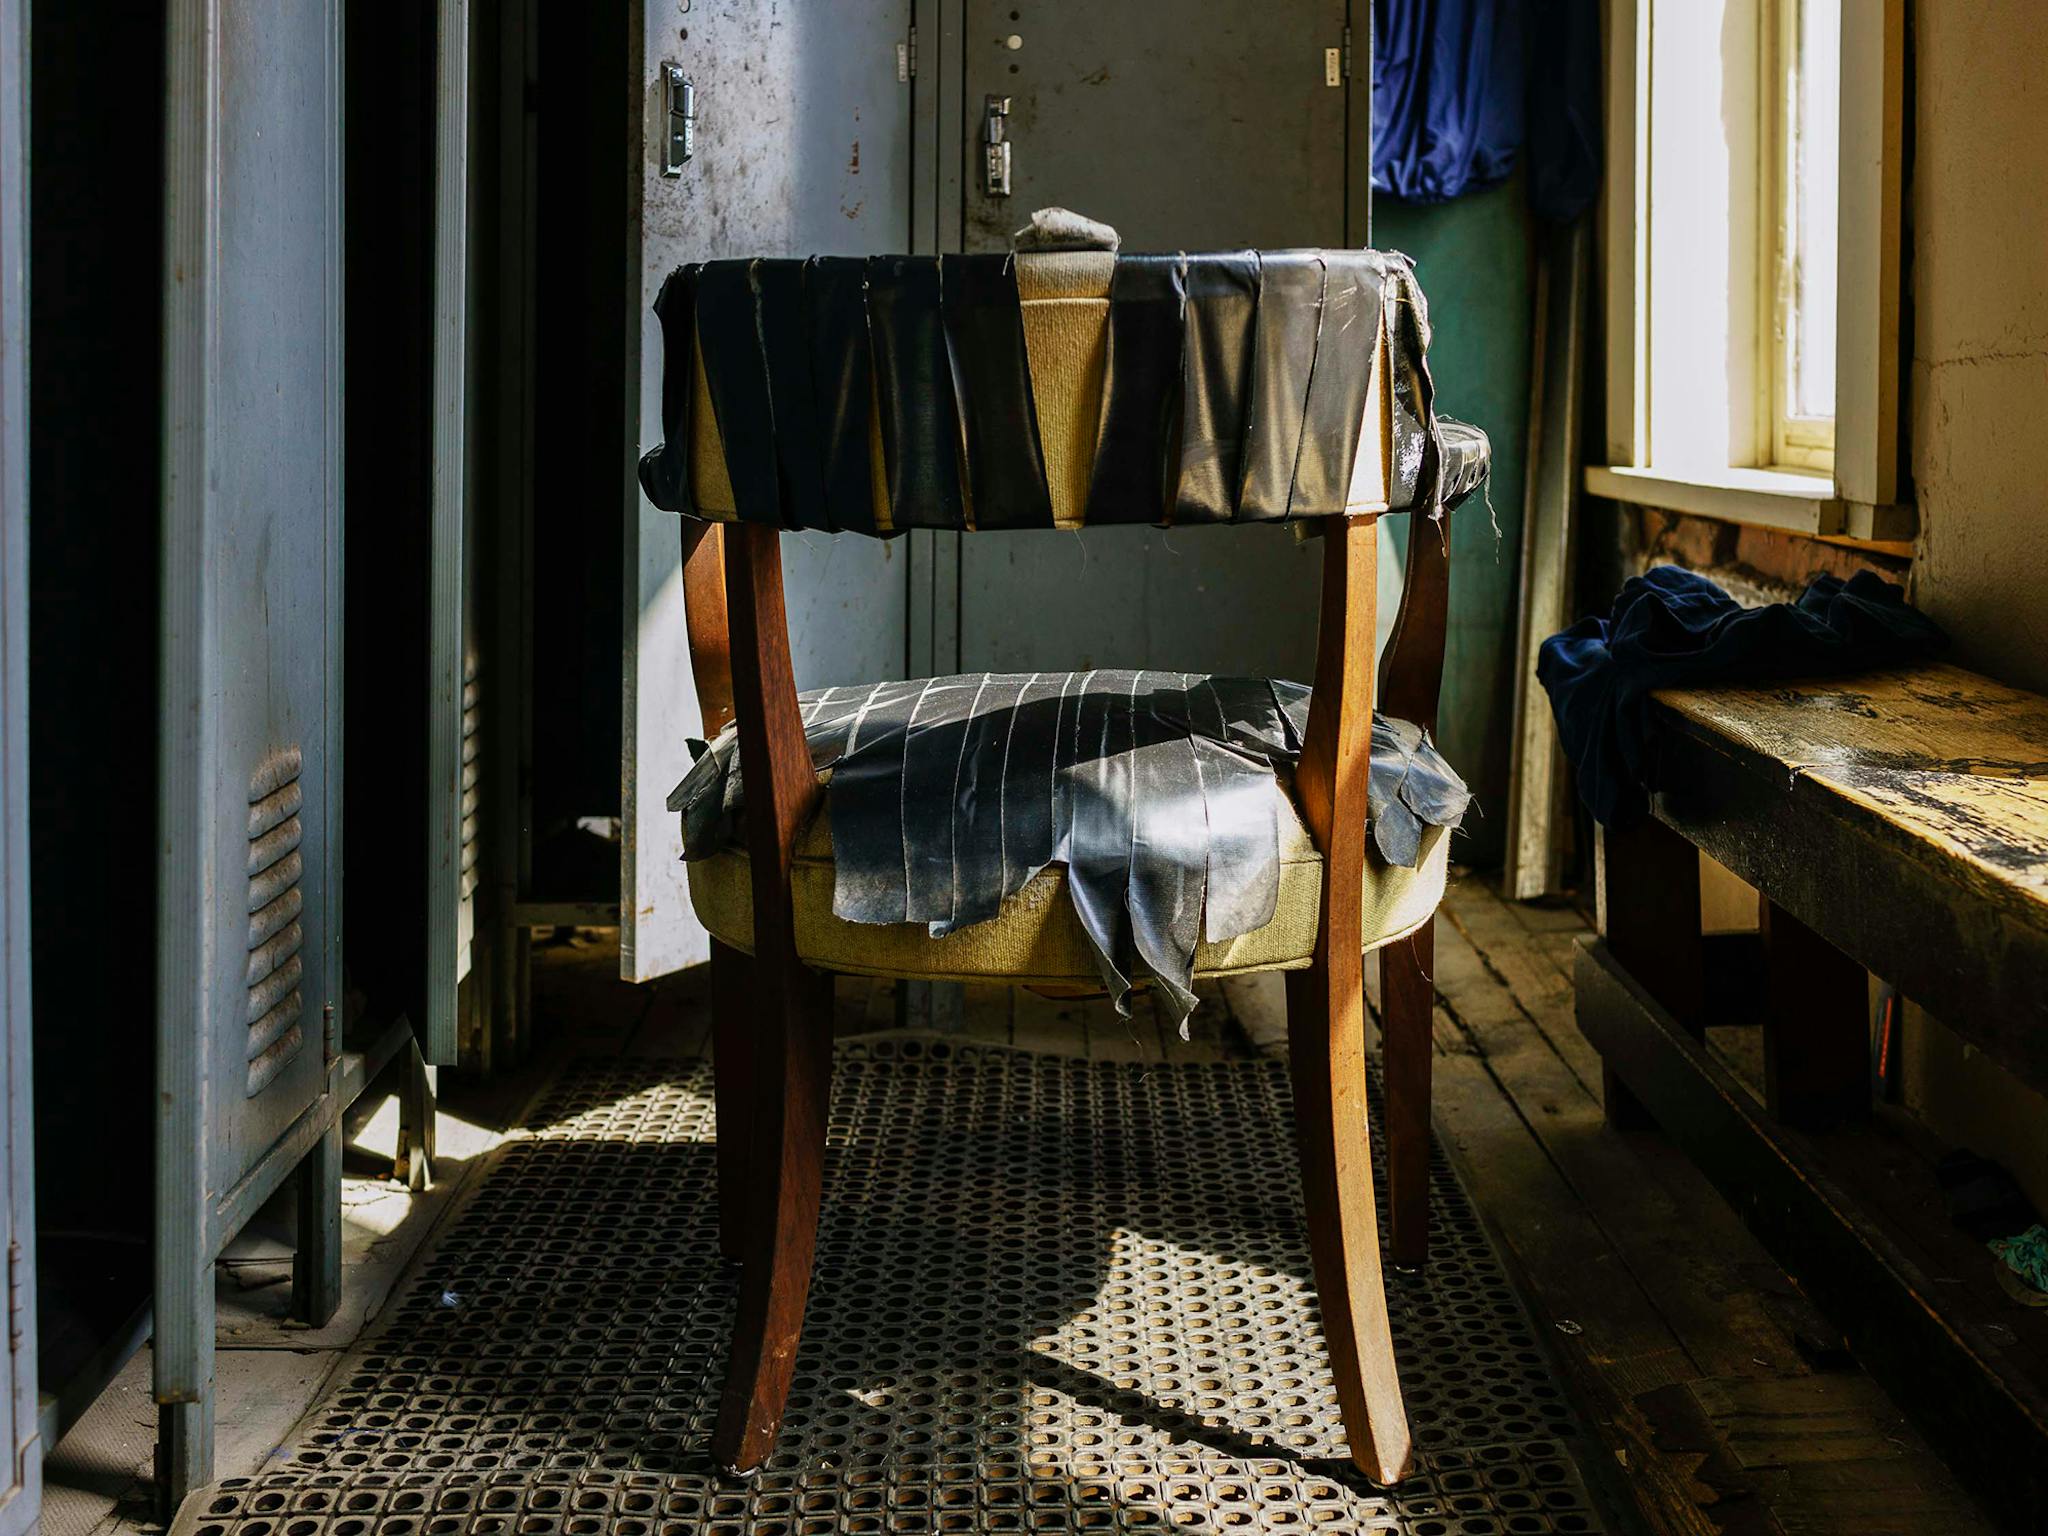 “The dilapidation was pretty striking,” says Diamond. The locker area—populated by a worn bench and this chair held together by yards of duct tape—was no exception. The men’s bathroom, however, was even worse: “I showed my pictures of the men’s room, which was filthy, to my mentor [fine art photographer Cig Harvey], and she felt physical revulsion. She said, ‘You cannot put those in the book.’” (He did not.) There were no doors on the men’s or women’s bathrooms, just flimsy curtains separating them from the rest of the workout area.